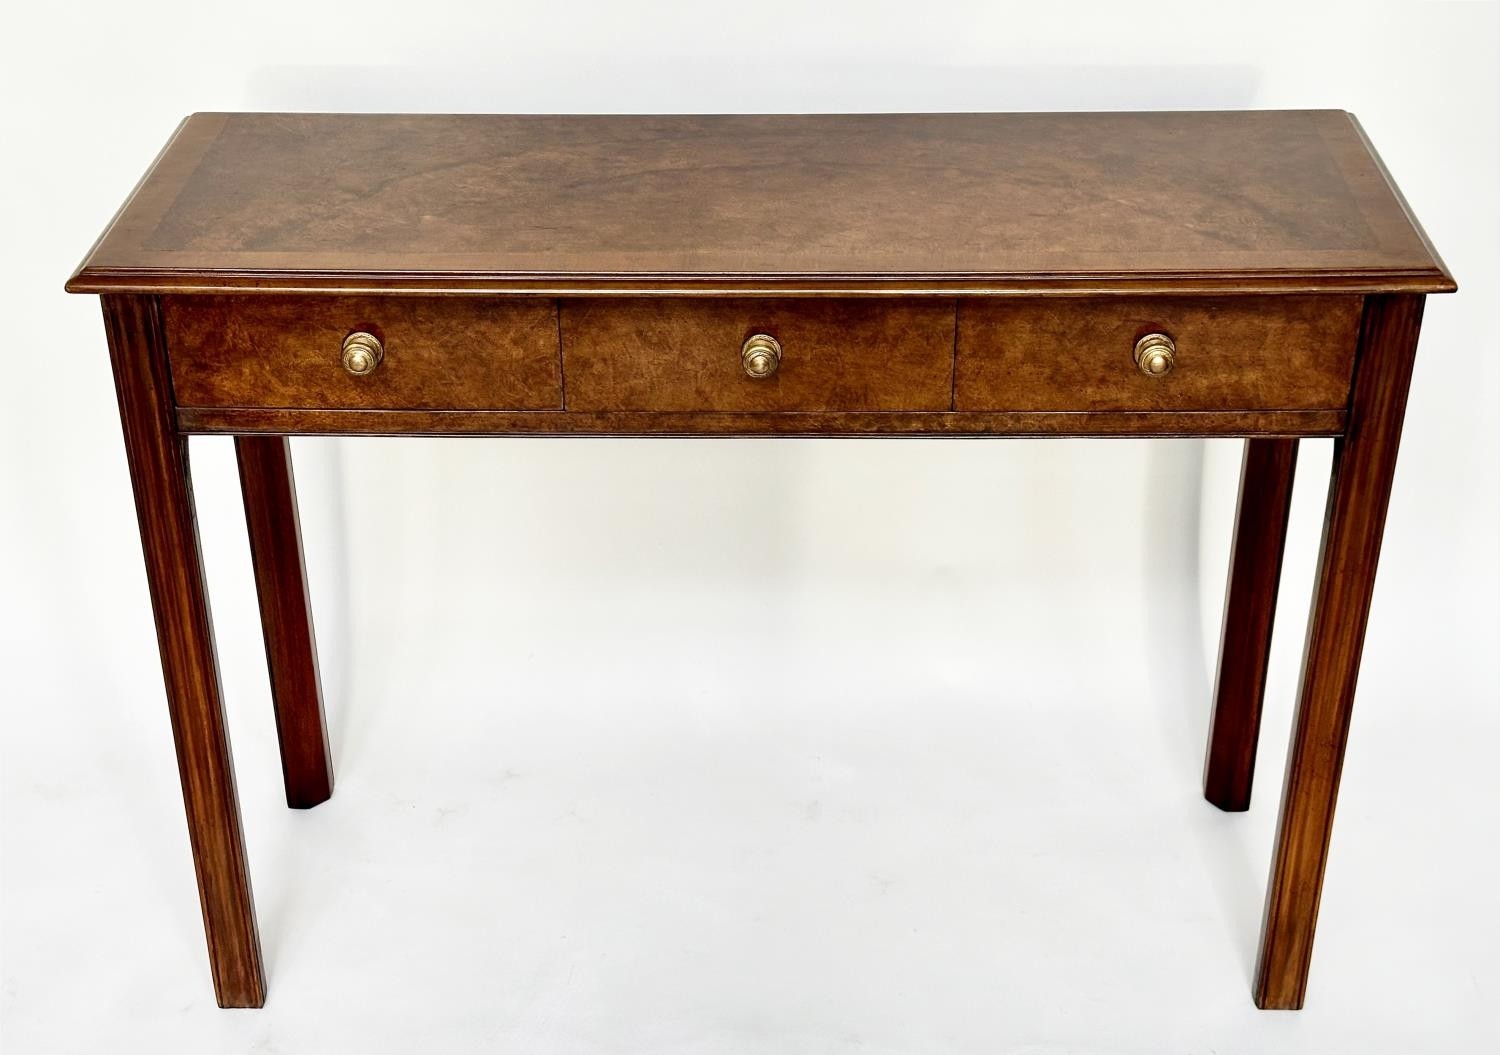 HALL TABLE, George III design walnut and crossbanded with three frieze drawers and channelled